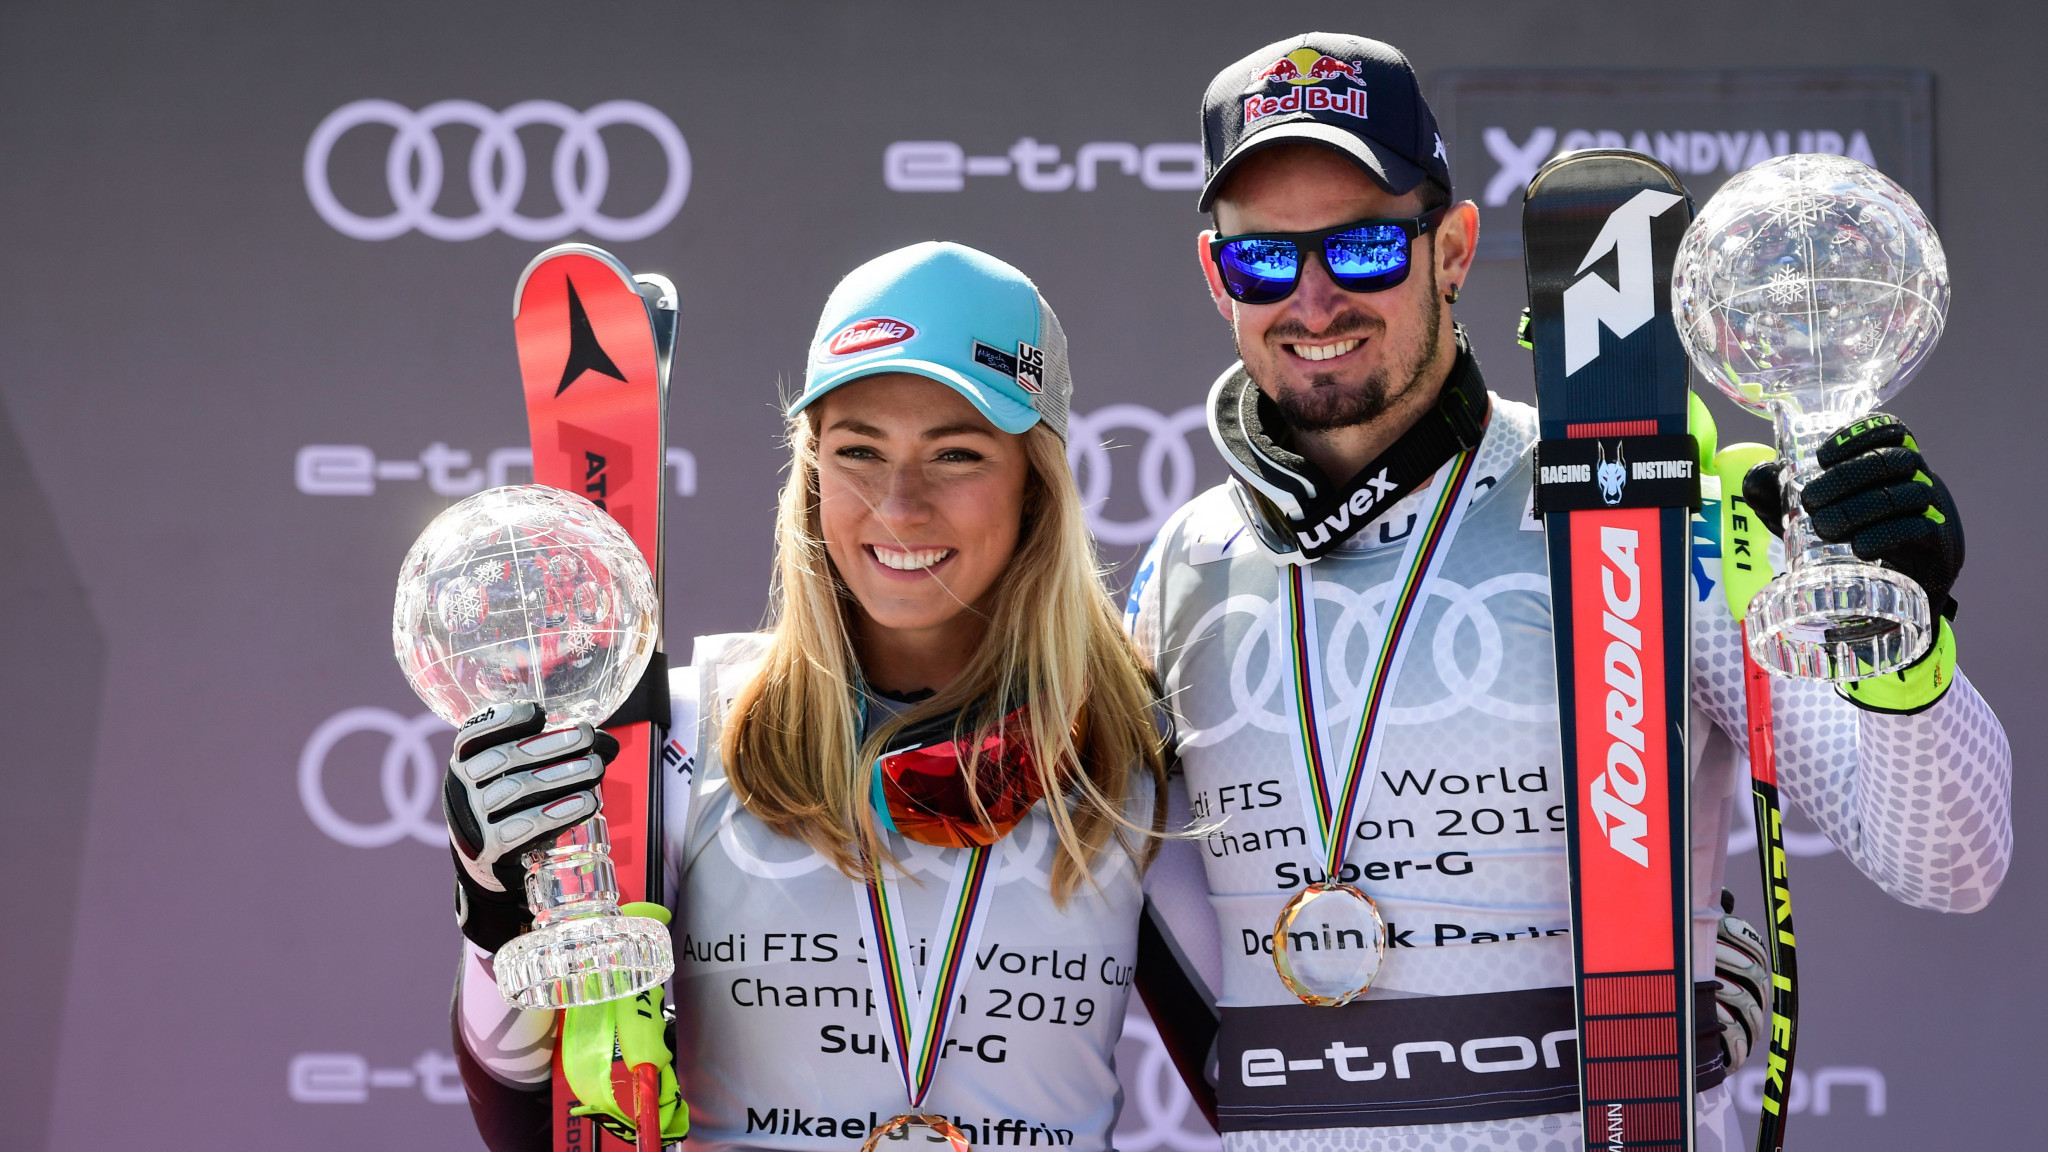 Overall super-G champions at the FIS Alpine Skiing World Cup Finals, Mikaela Shiffrin and Dominik Paris, display their winners' crystal globes in Soldeu ©Getty Images